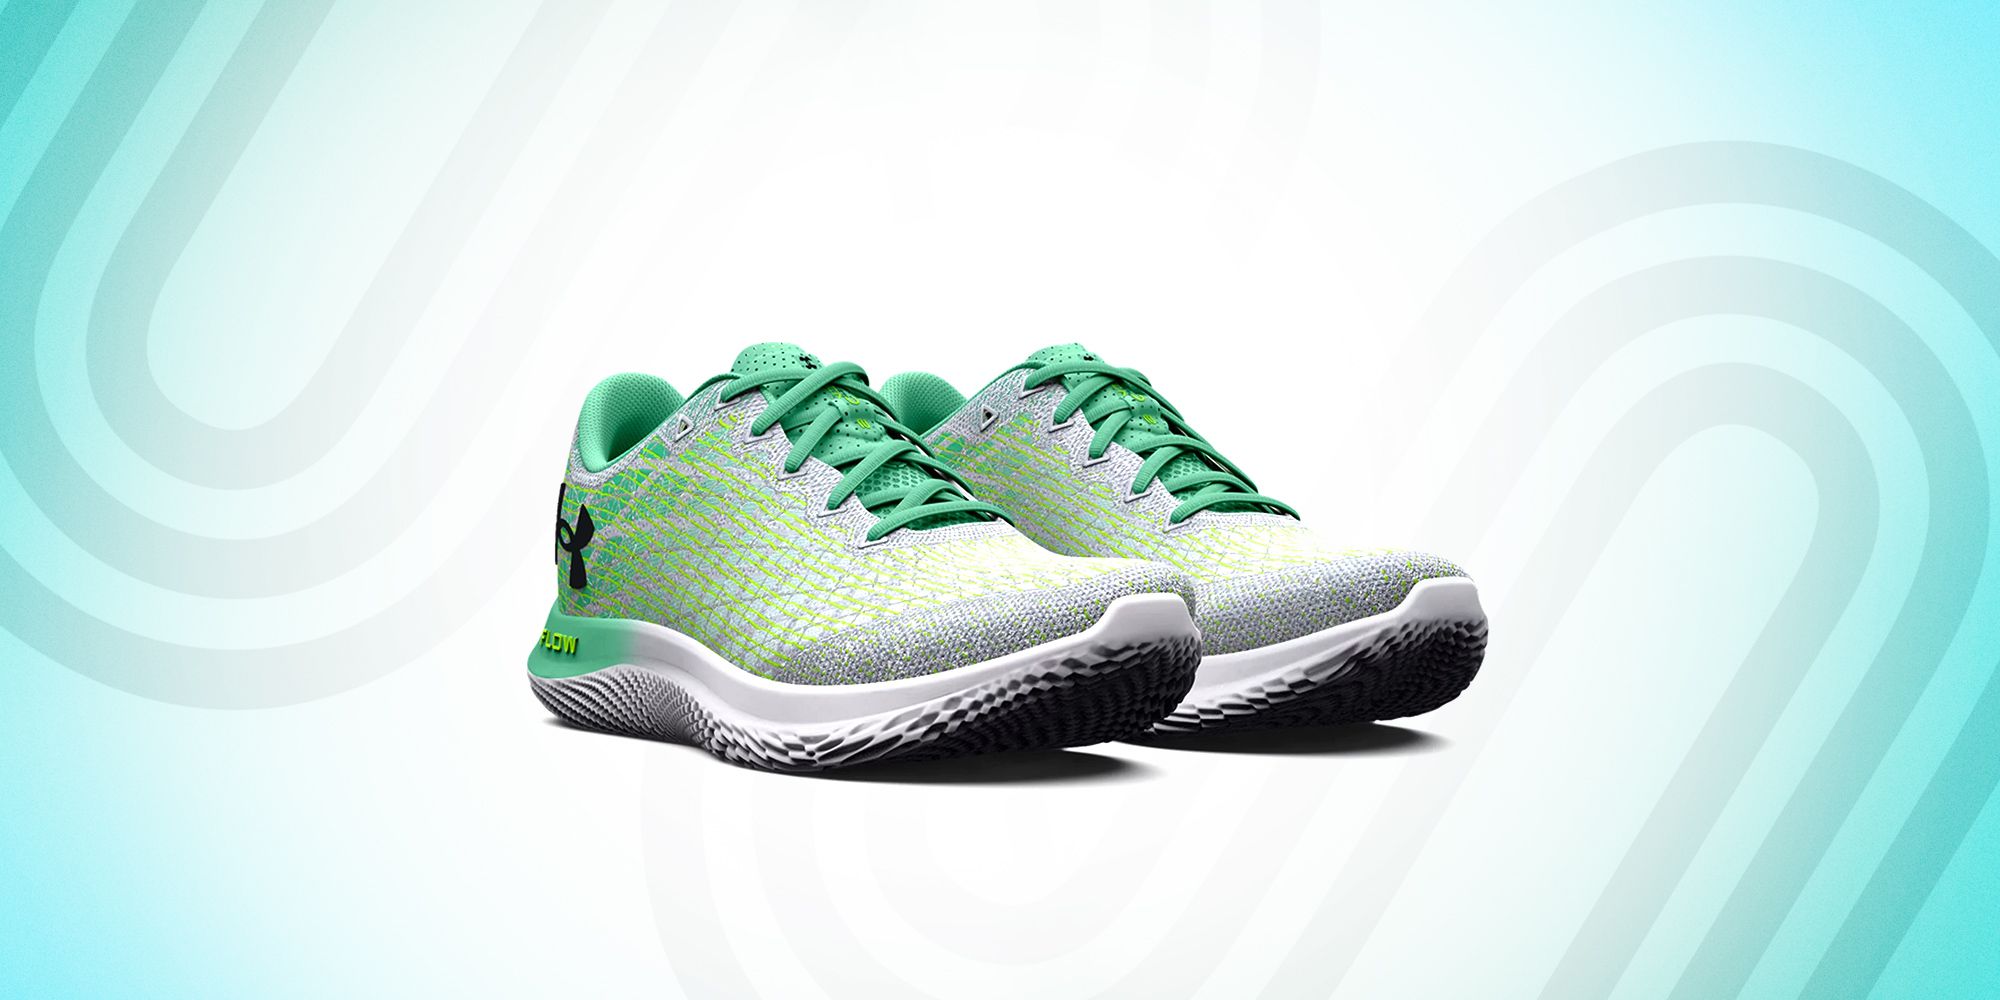 Best Under Armour Running Shoes | Under Armour Shoes